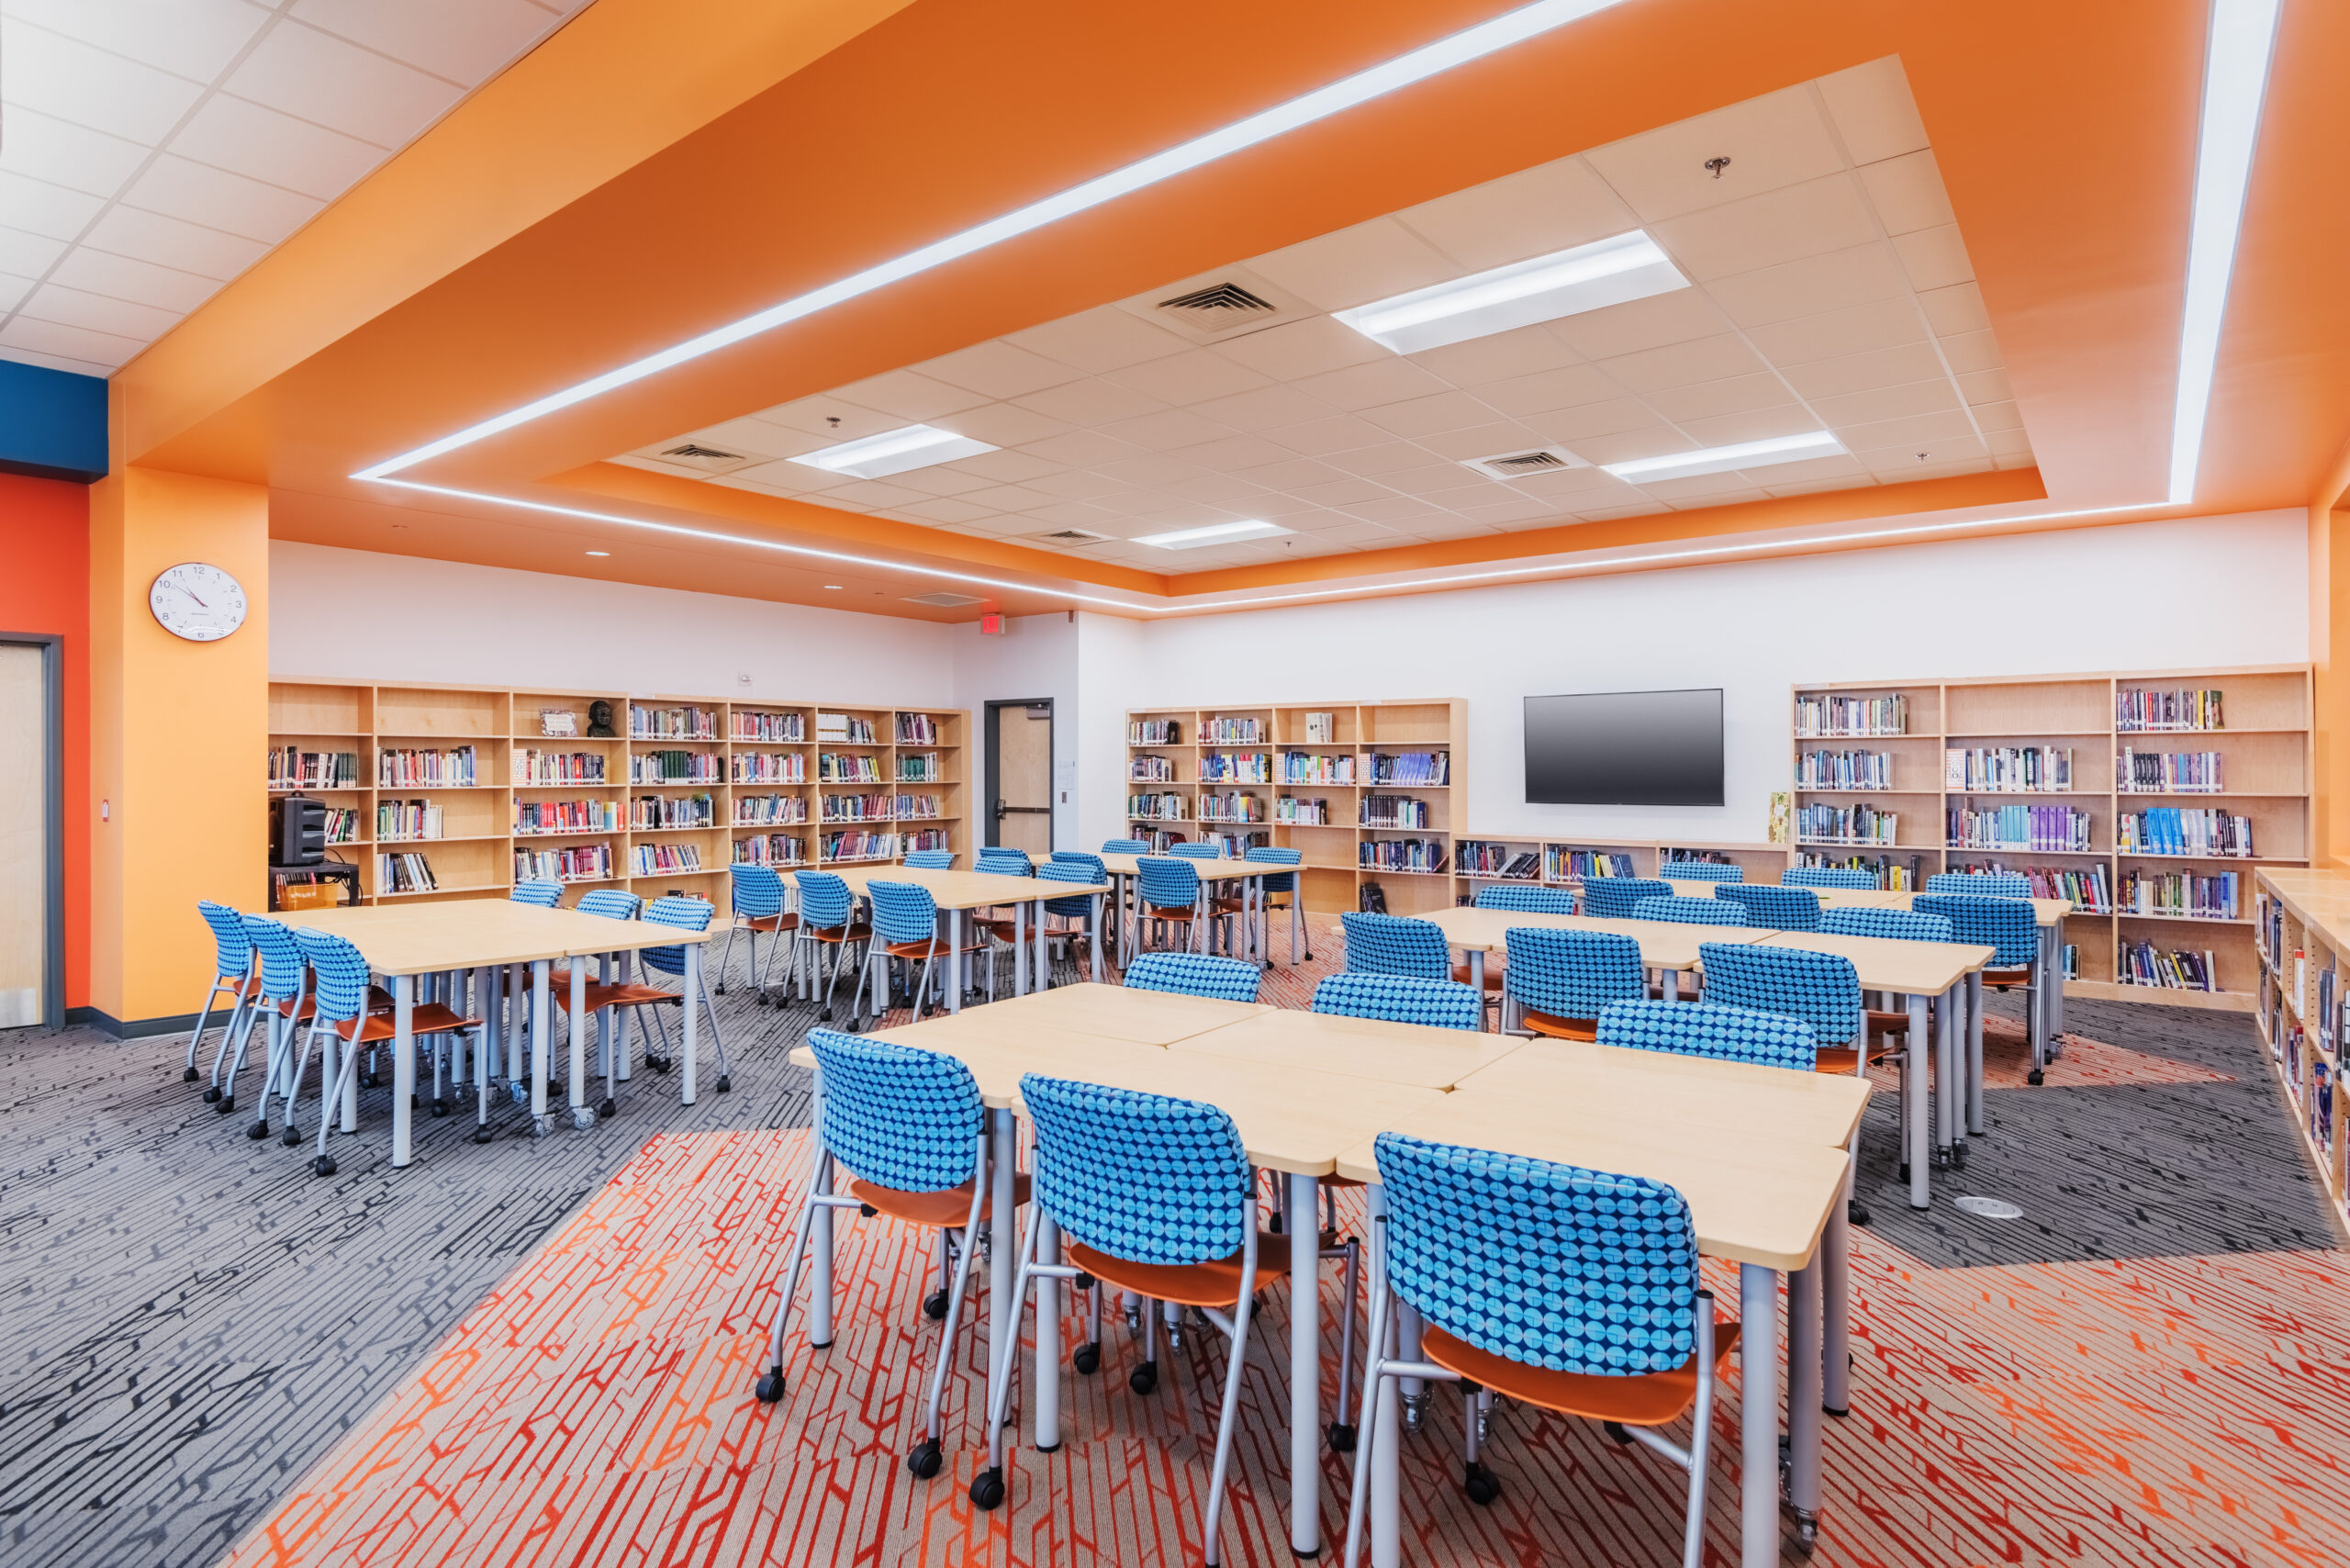 Fuquay-Varina High School Library with Full Bookshelves, Tables for Students, and a Decorative Orange Ceiling